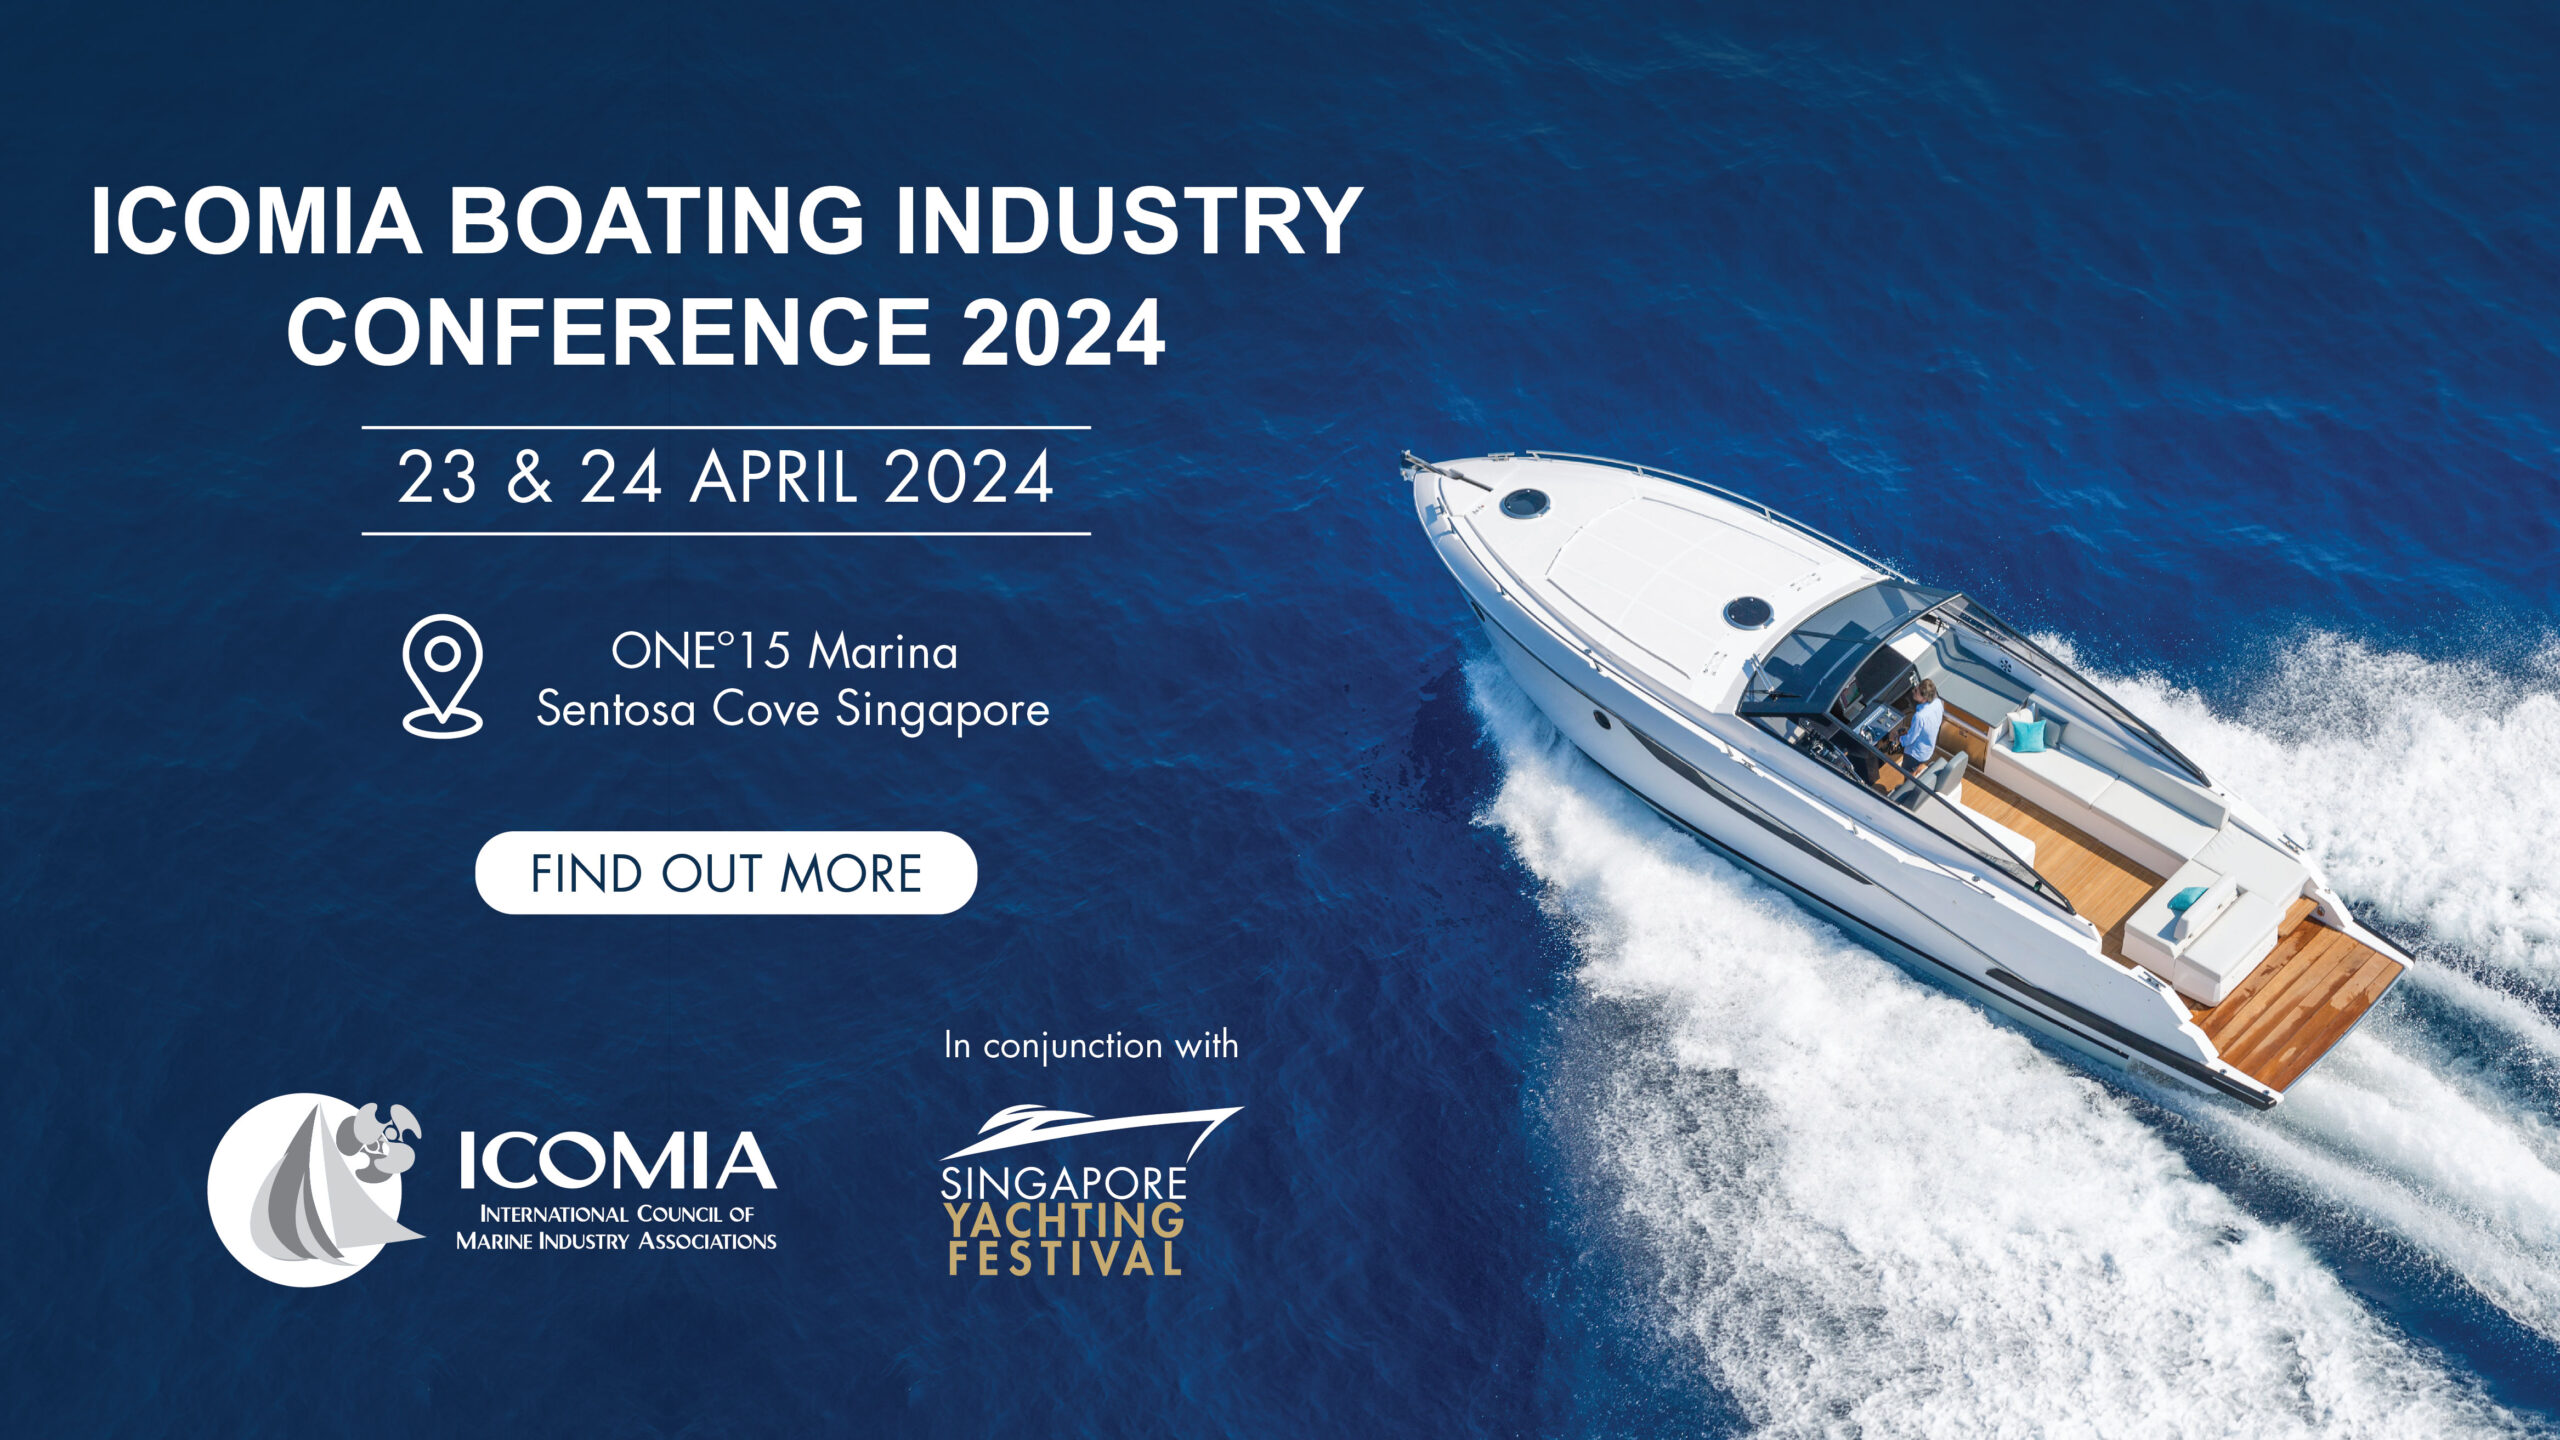 ICOMIA Boating Industry Conference, Singapore, 23-24 April 2024